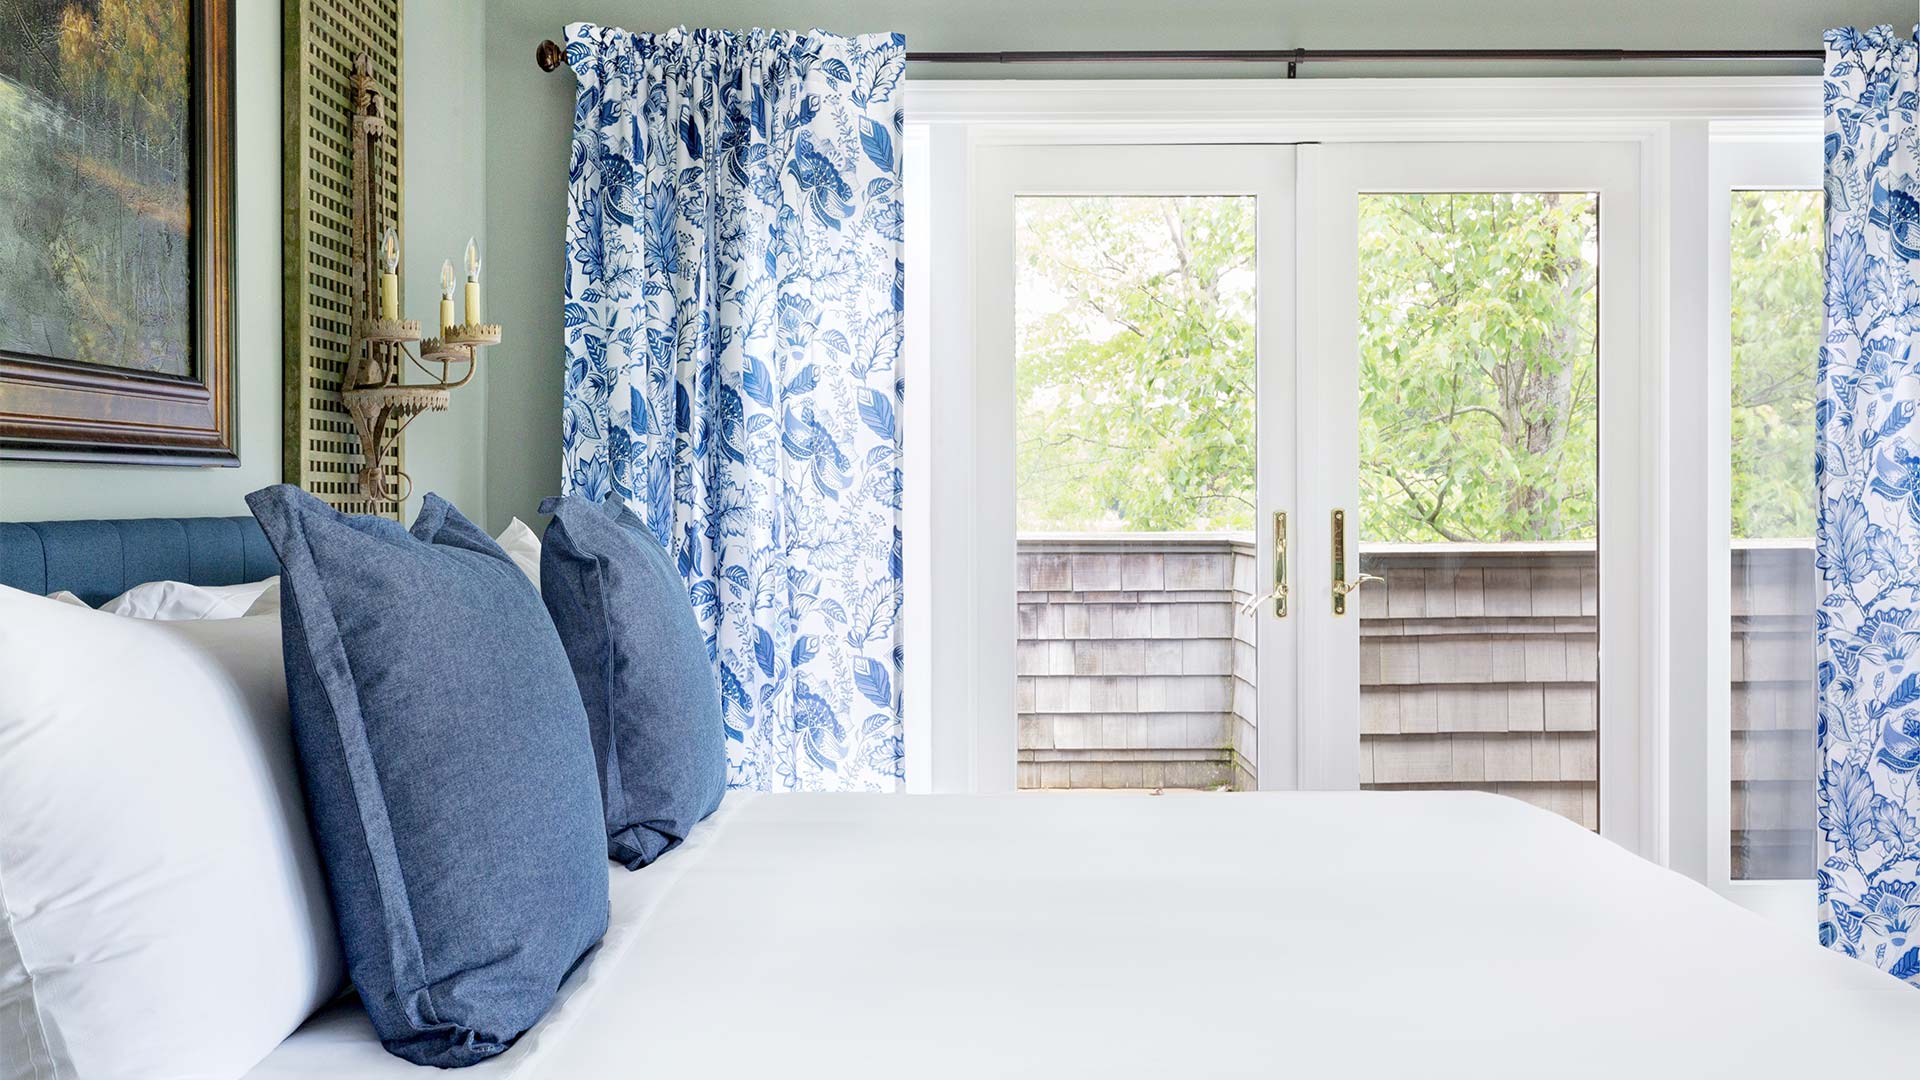 detail shot of a bedroom. There is a bed with white linens and blue throw pillows. There are glass doors that lead out to a deck area. There are blue floral curtains.